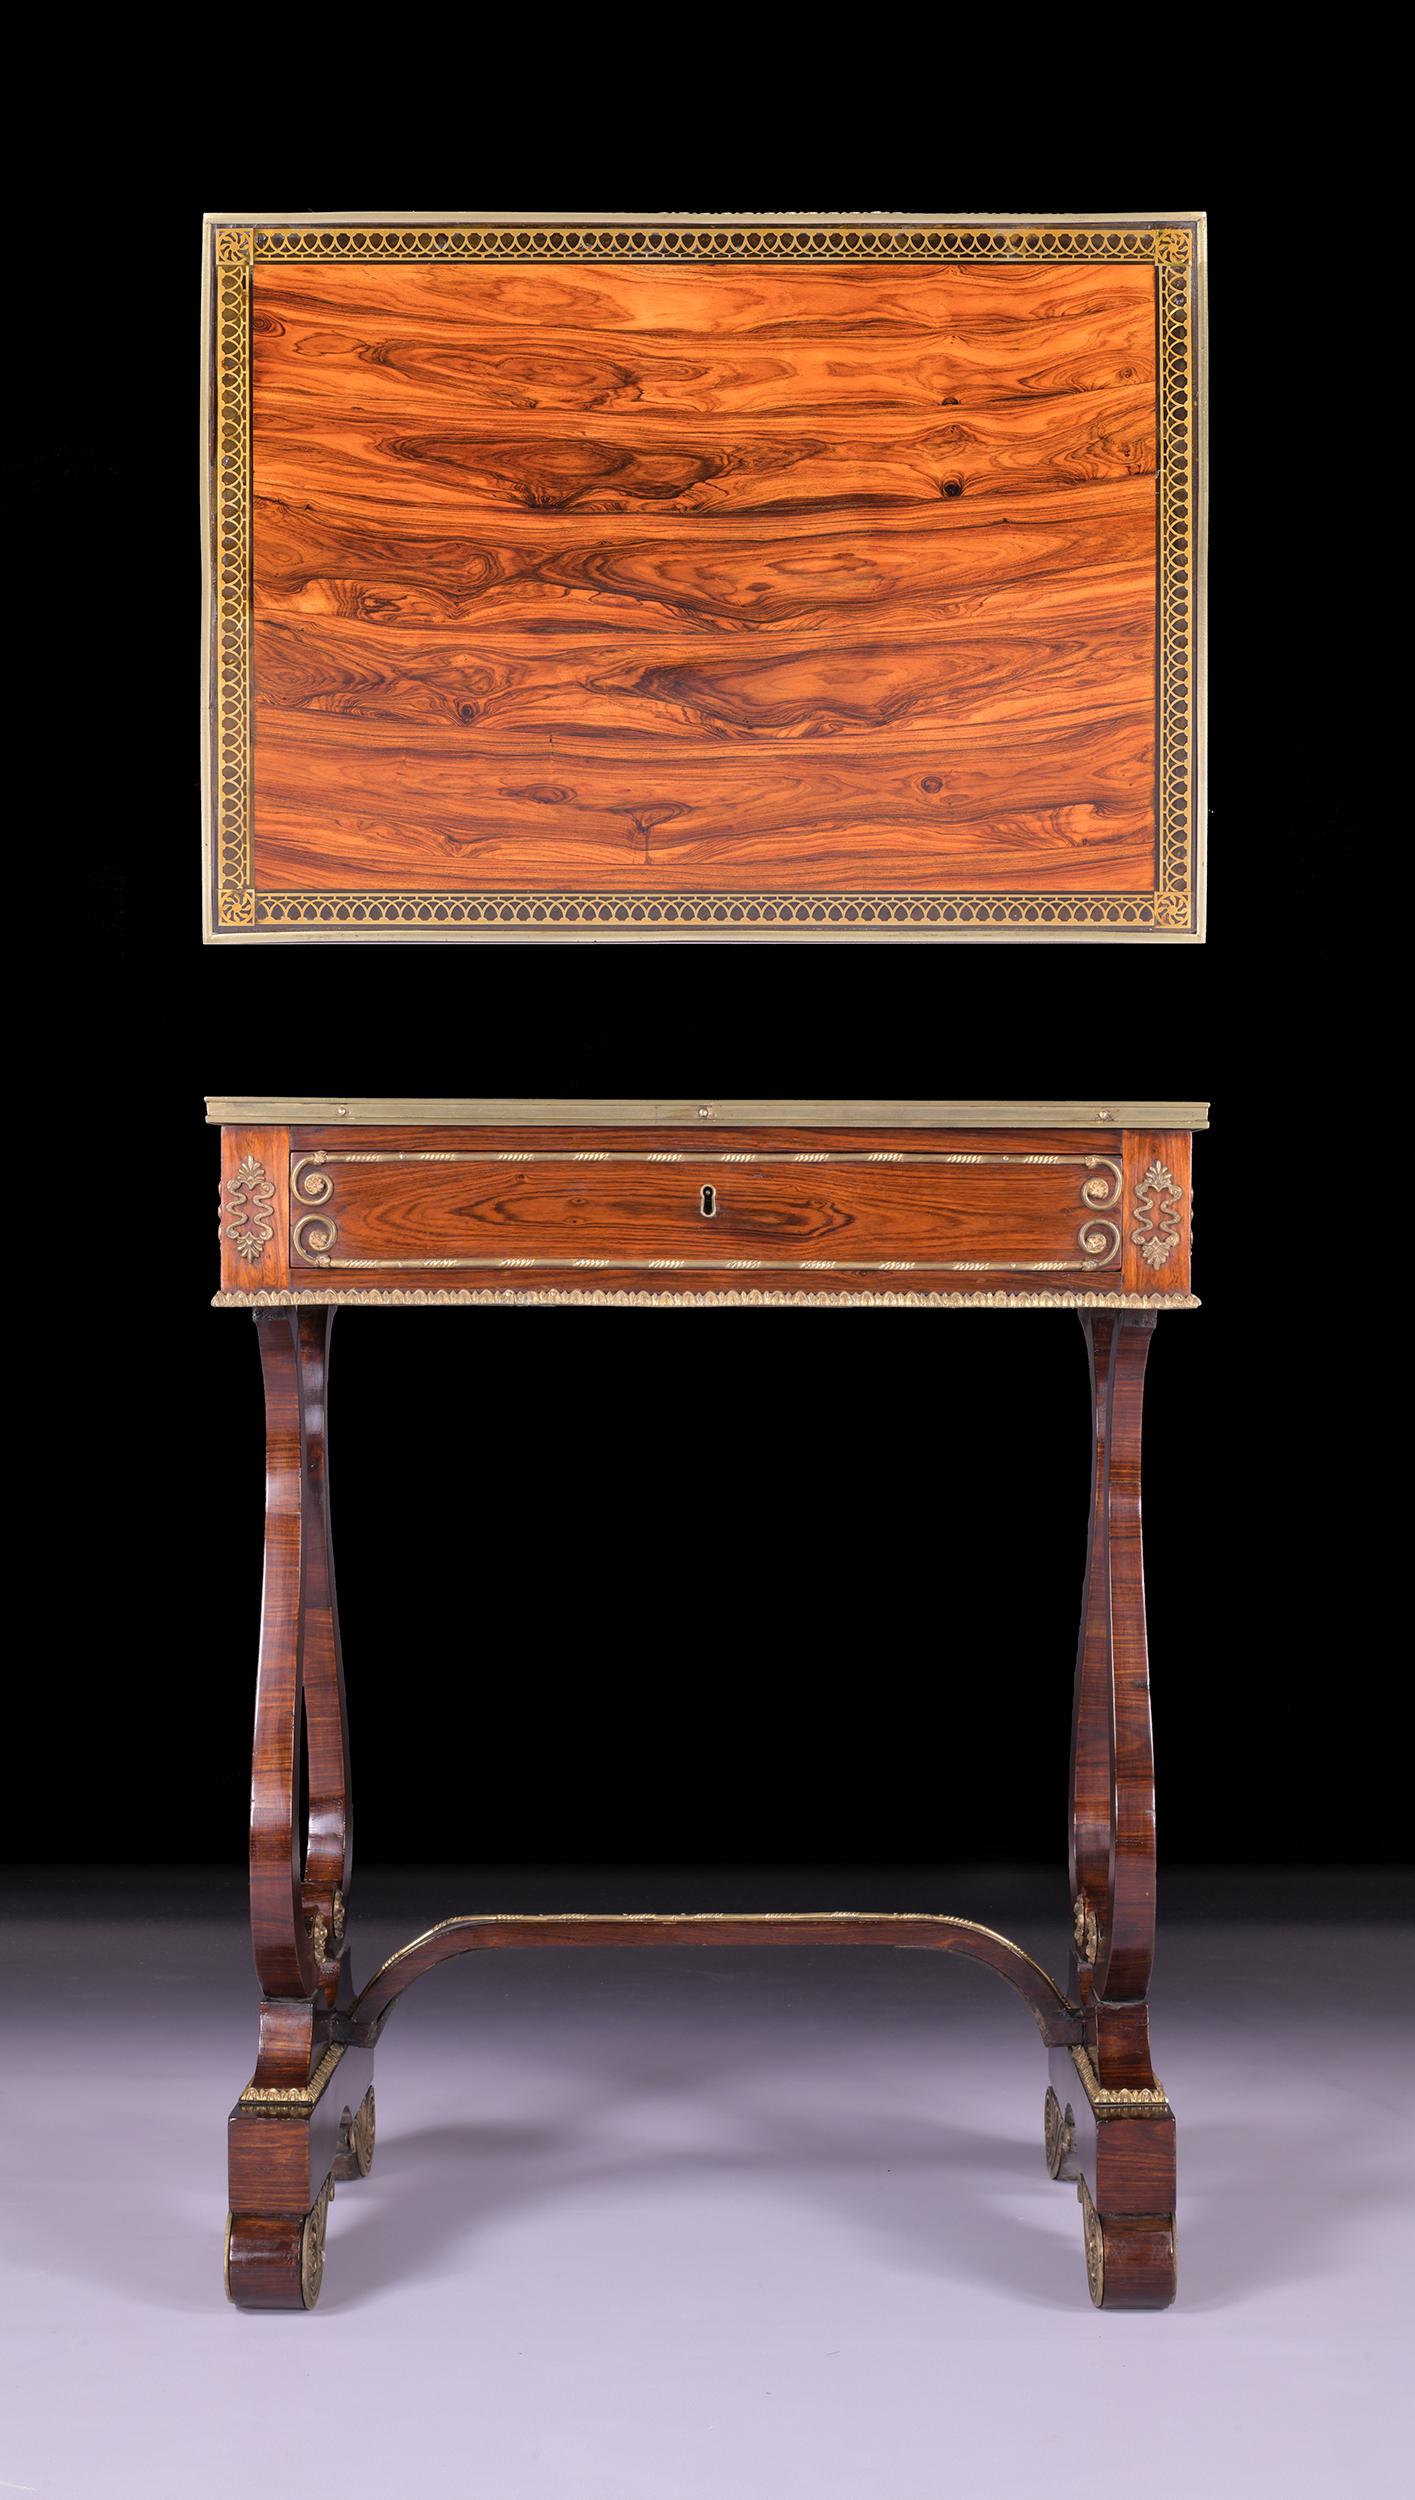 English 19th Century Regency Gonzalo Alves Side Table in the Manner of John Mclean